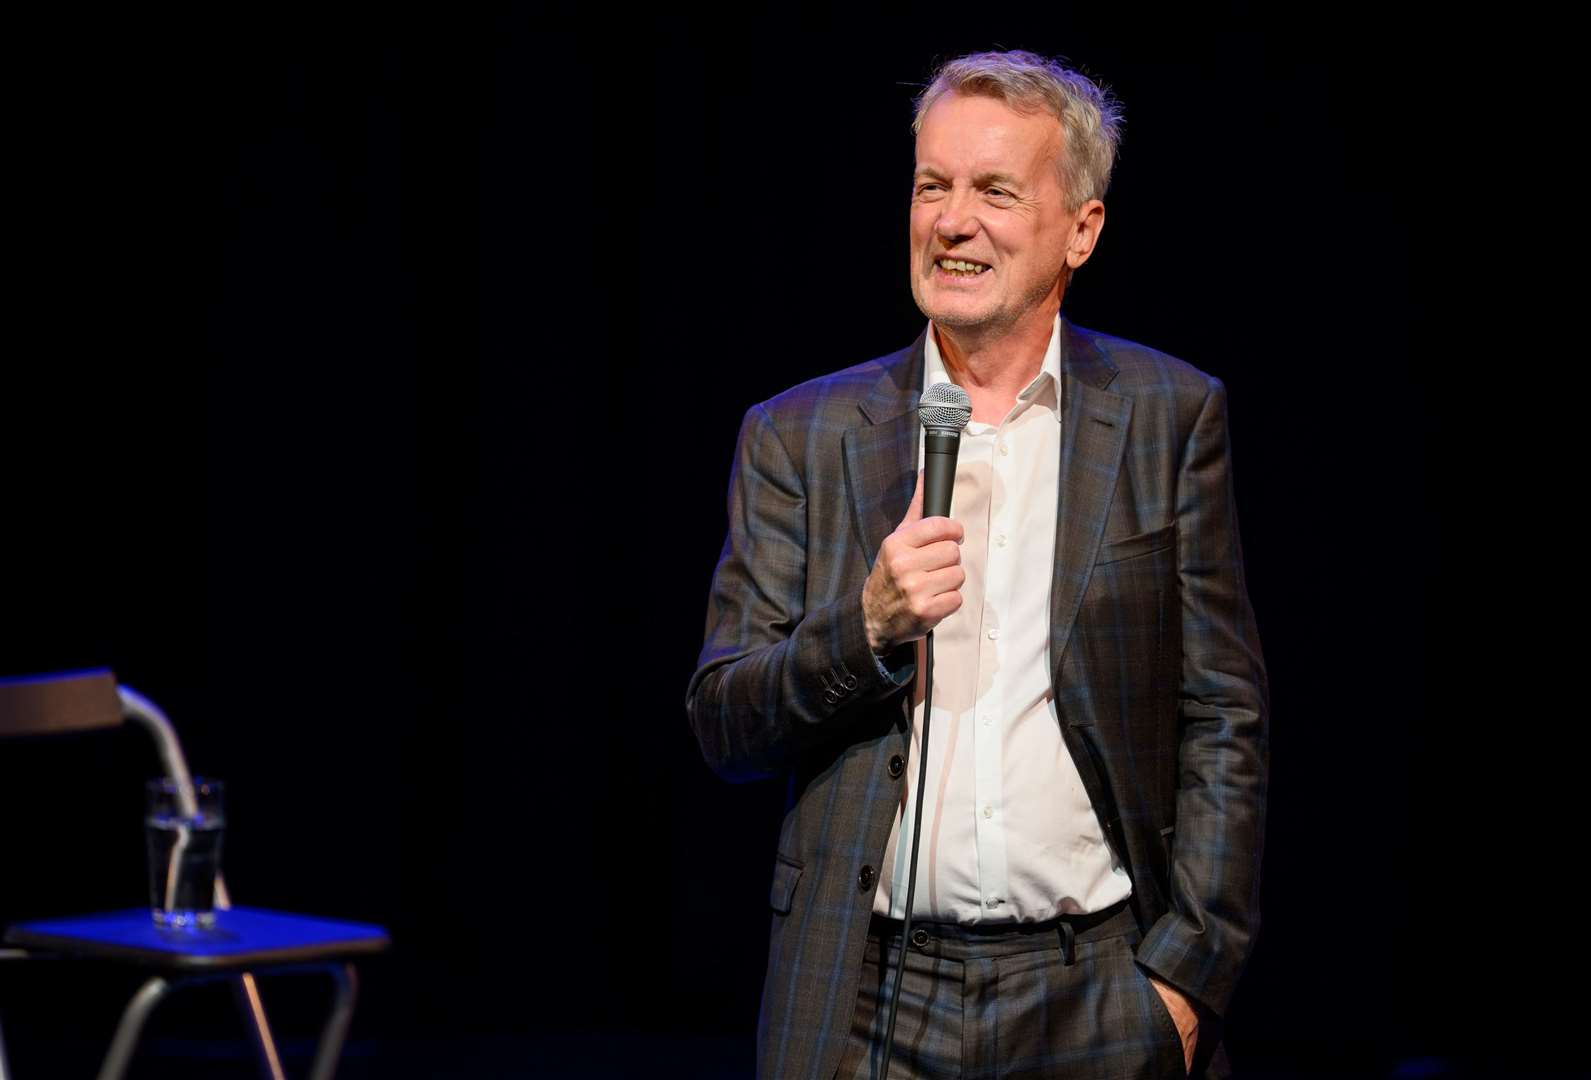 Comedian Frank Skinner brought his new 30 Years of Dirt show to Leas Cliff Hall last week. Picture: David Monteith-Hodge